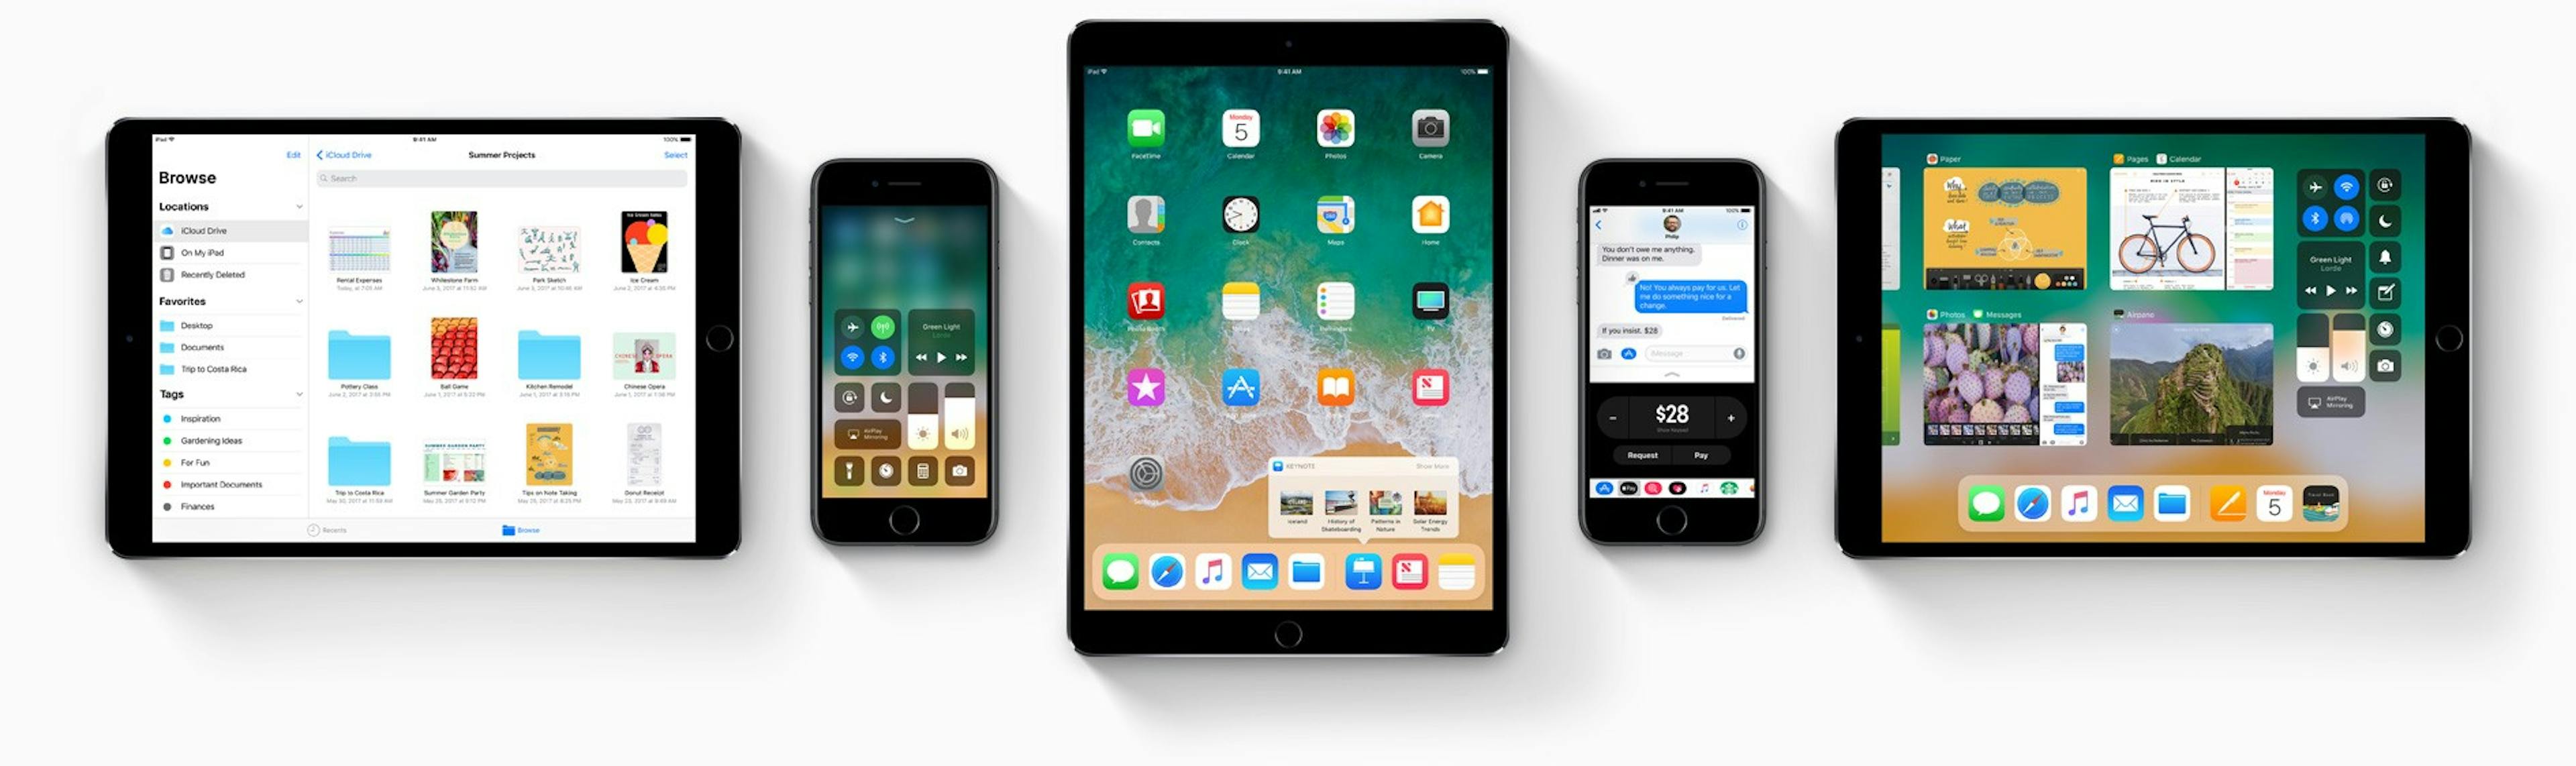 featured image - iOS 11: The good, the bad, and the completely unusable